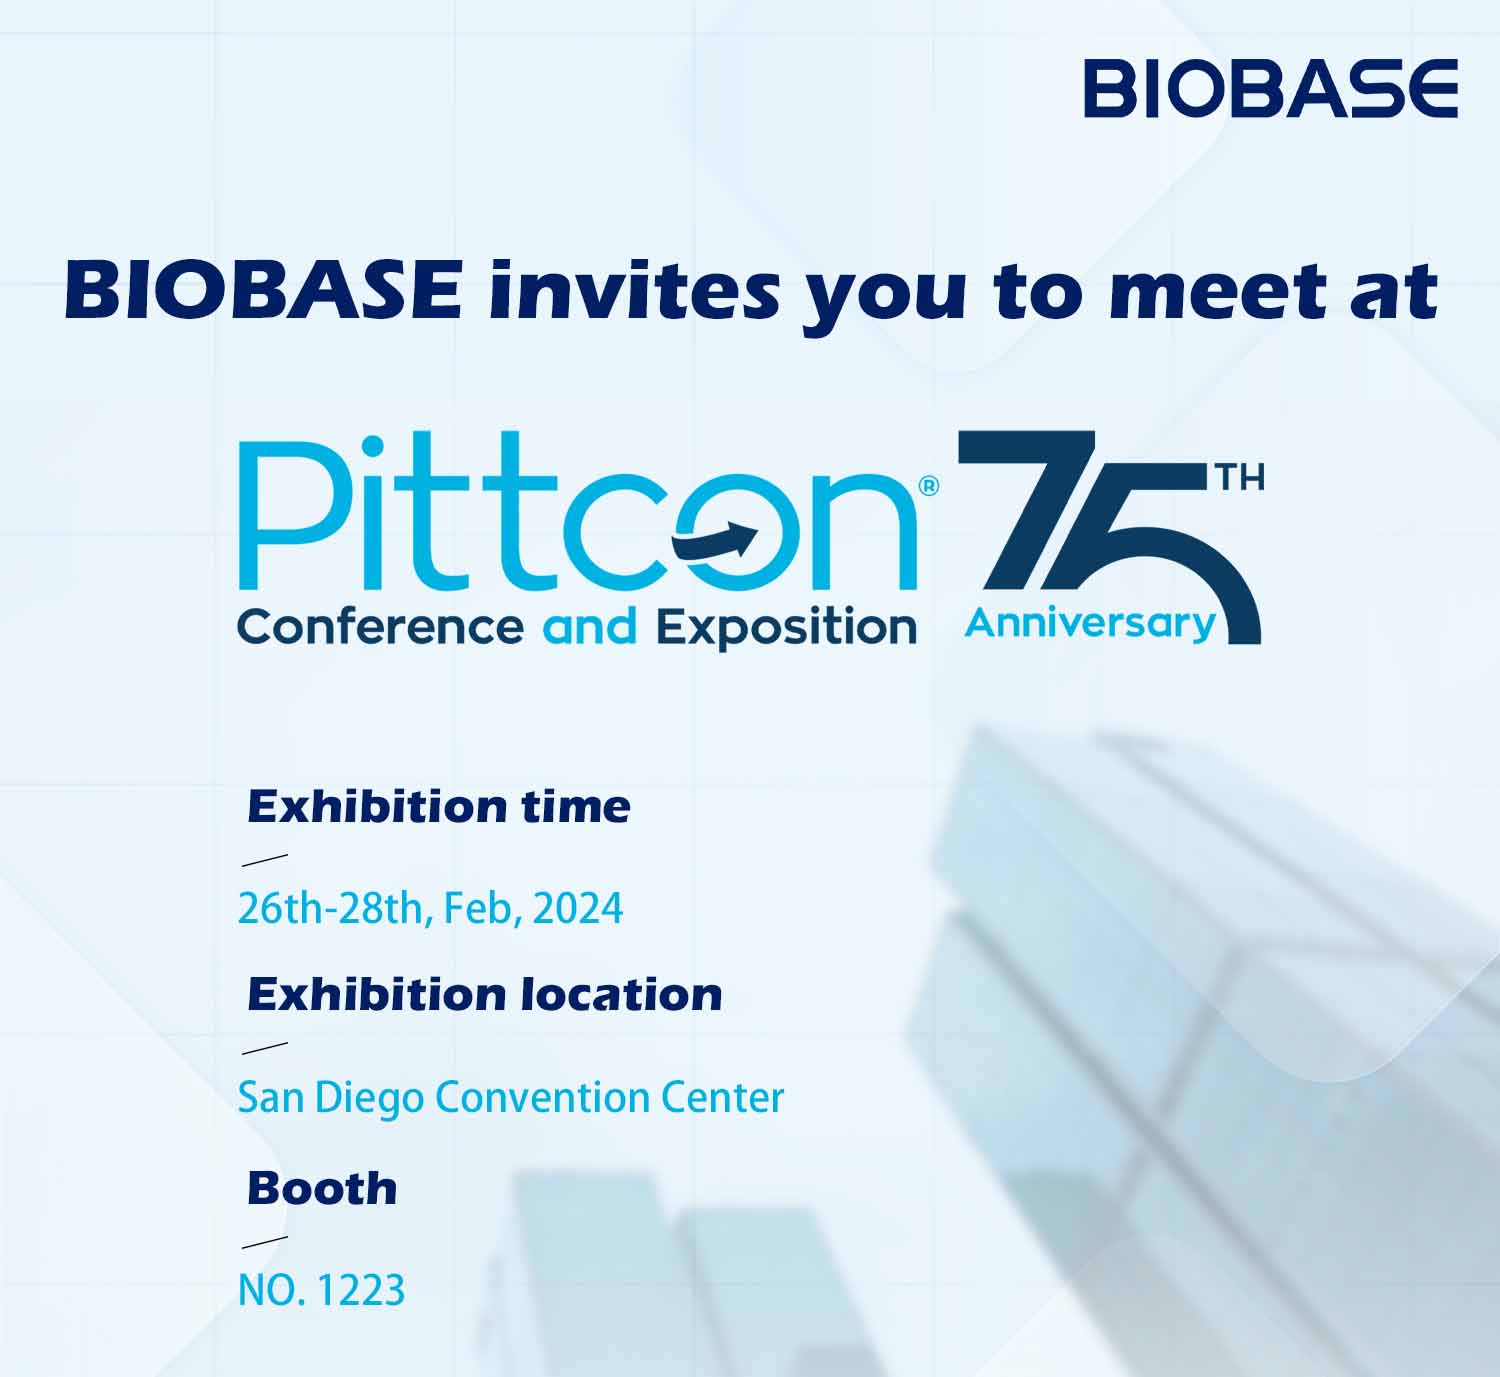 BIOBASE invites you to meet at PITTCON 2024